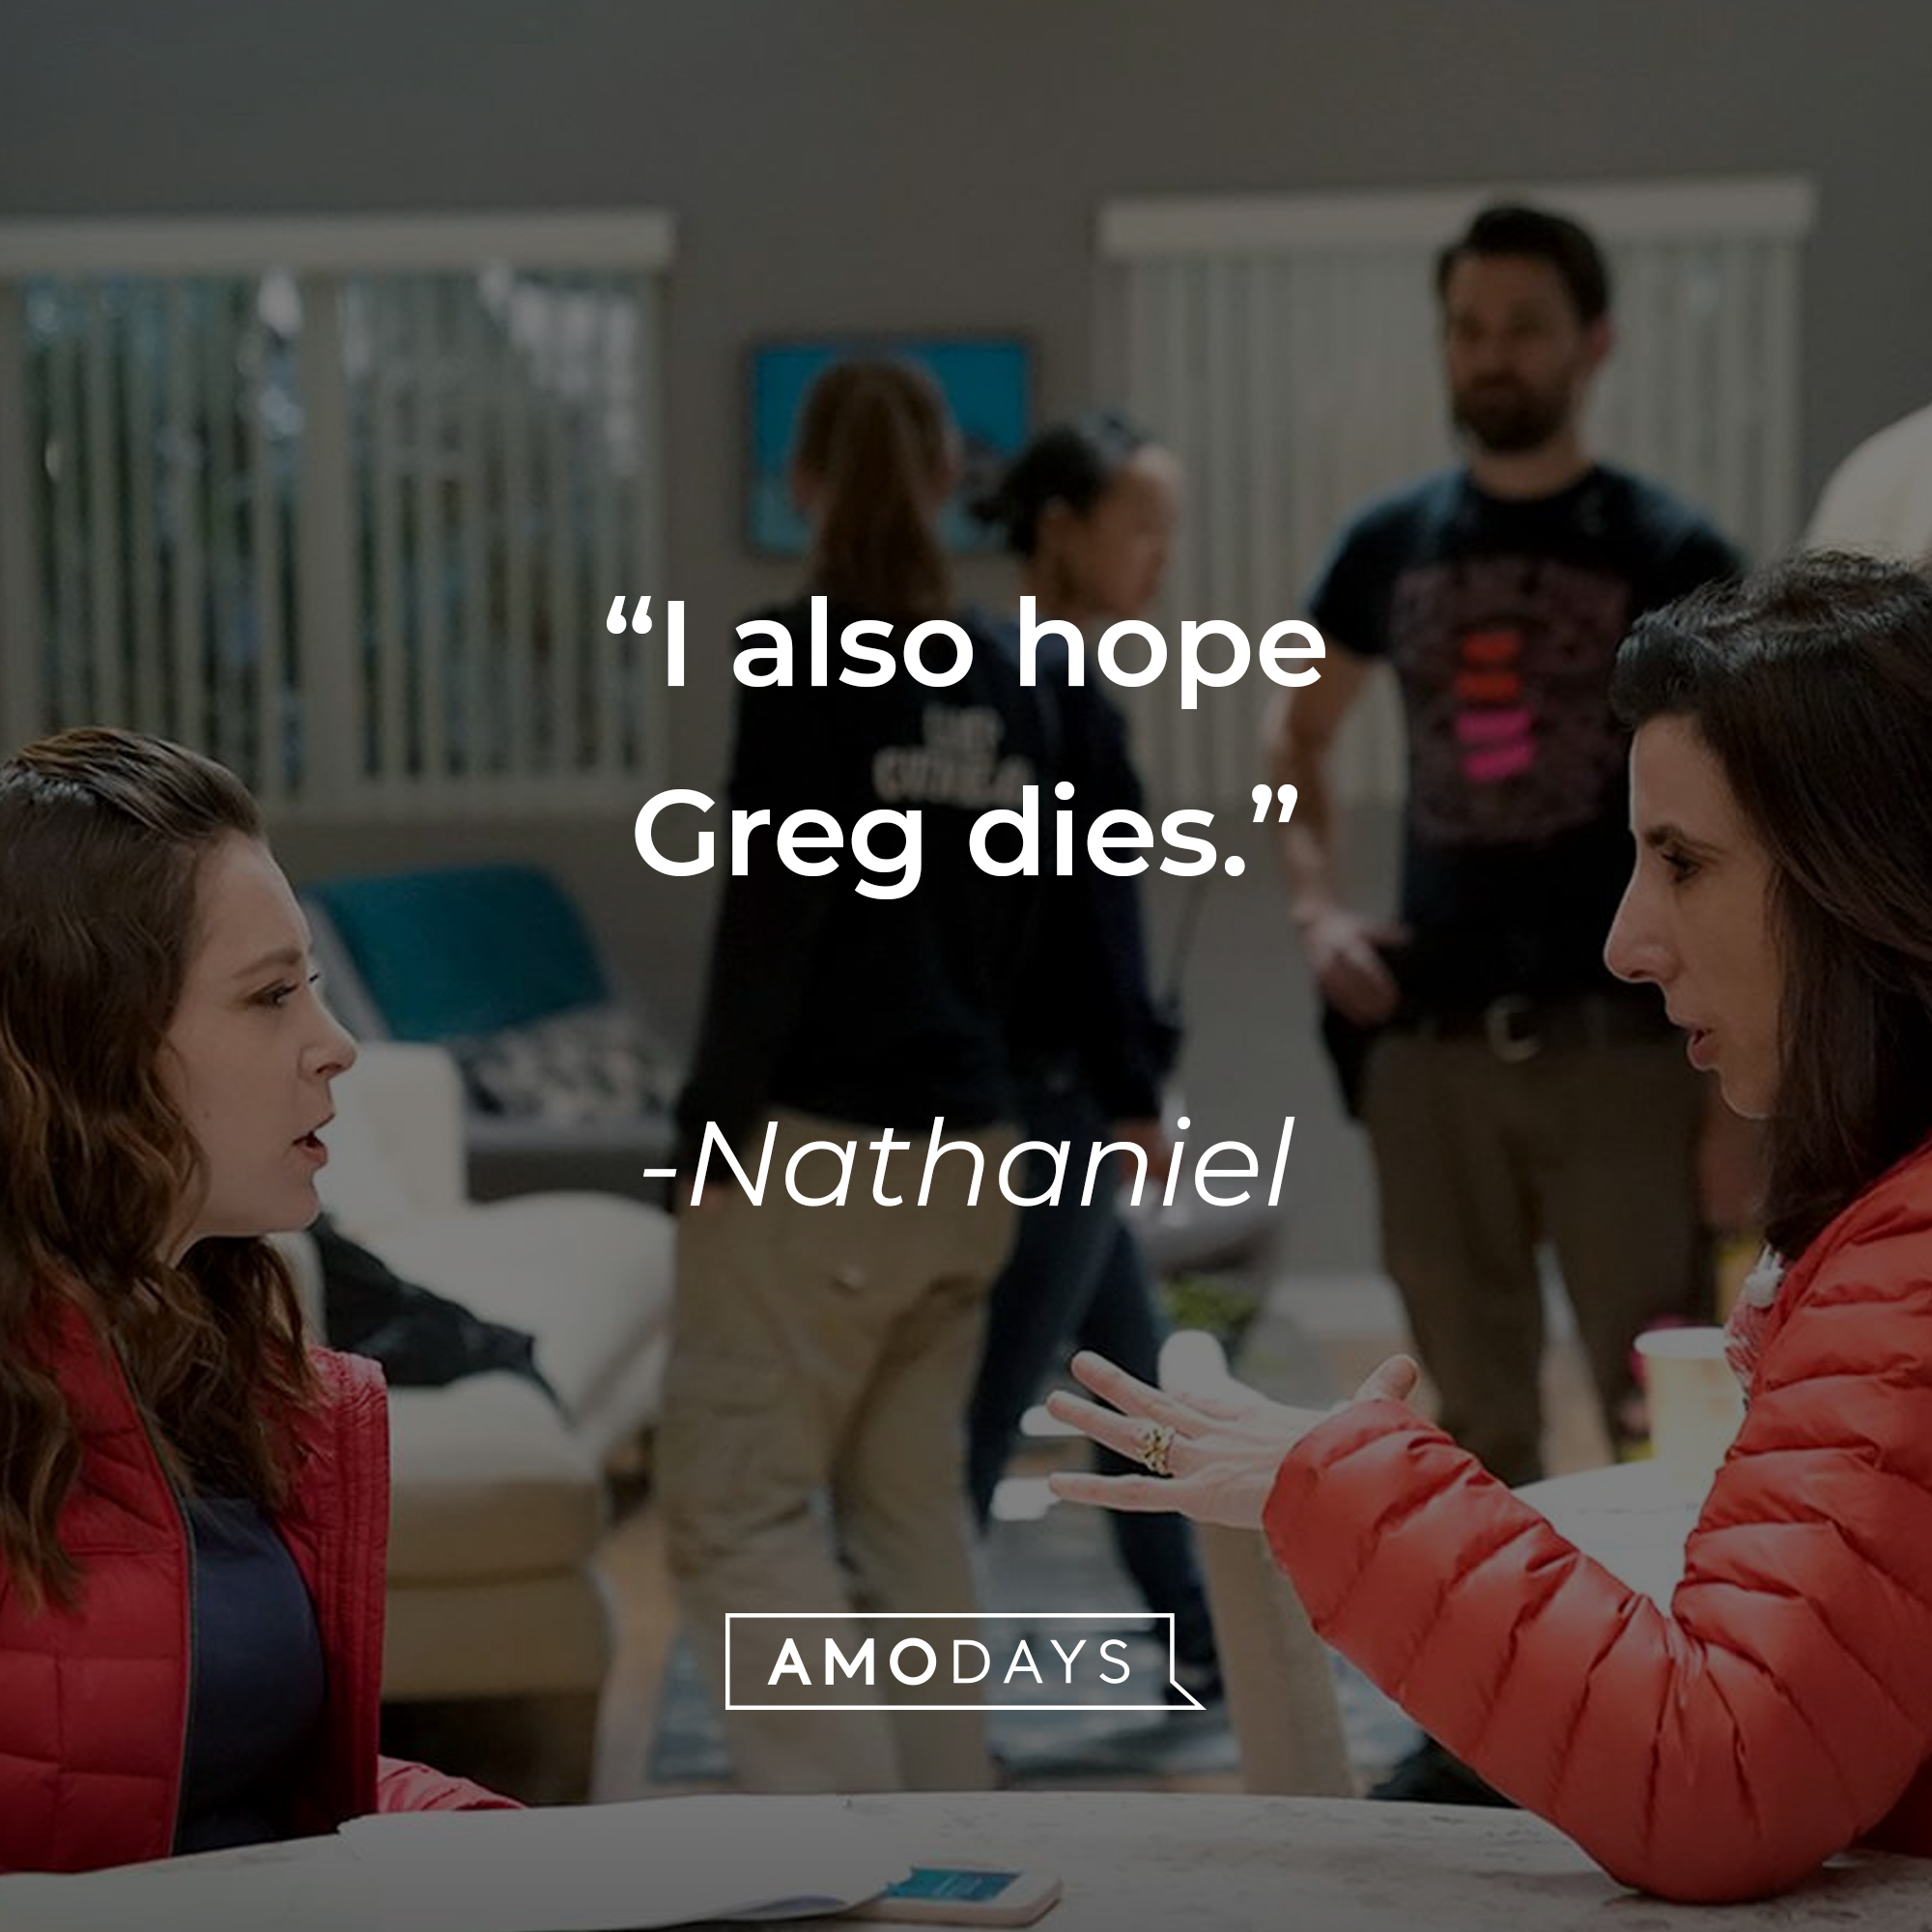 Rebecca and another character with Nathaniel’s quote : “I also hope Greg dies.”  |Source: facebook.com/crazyxgf